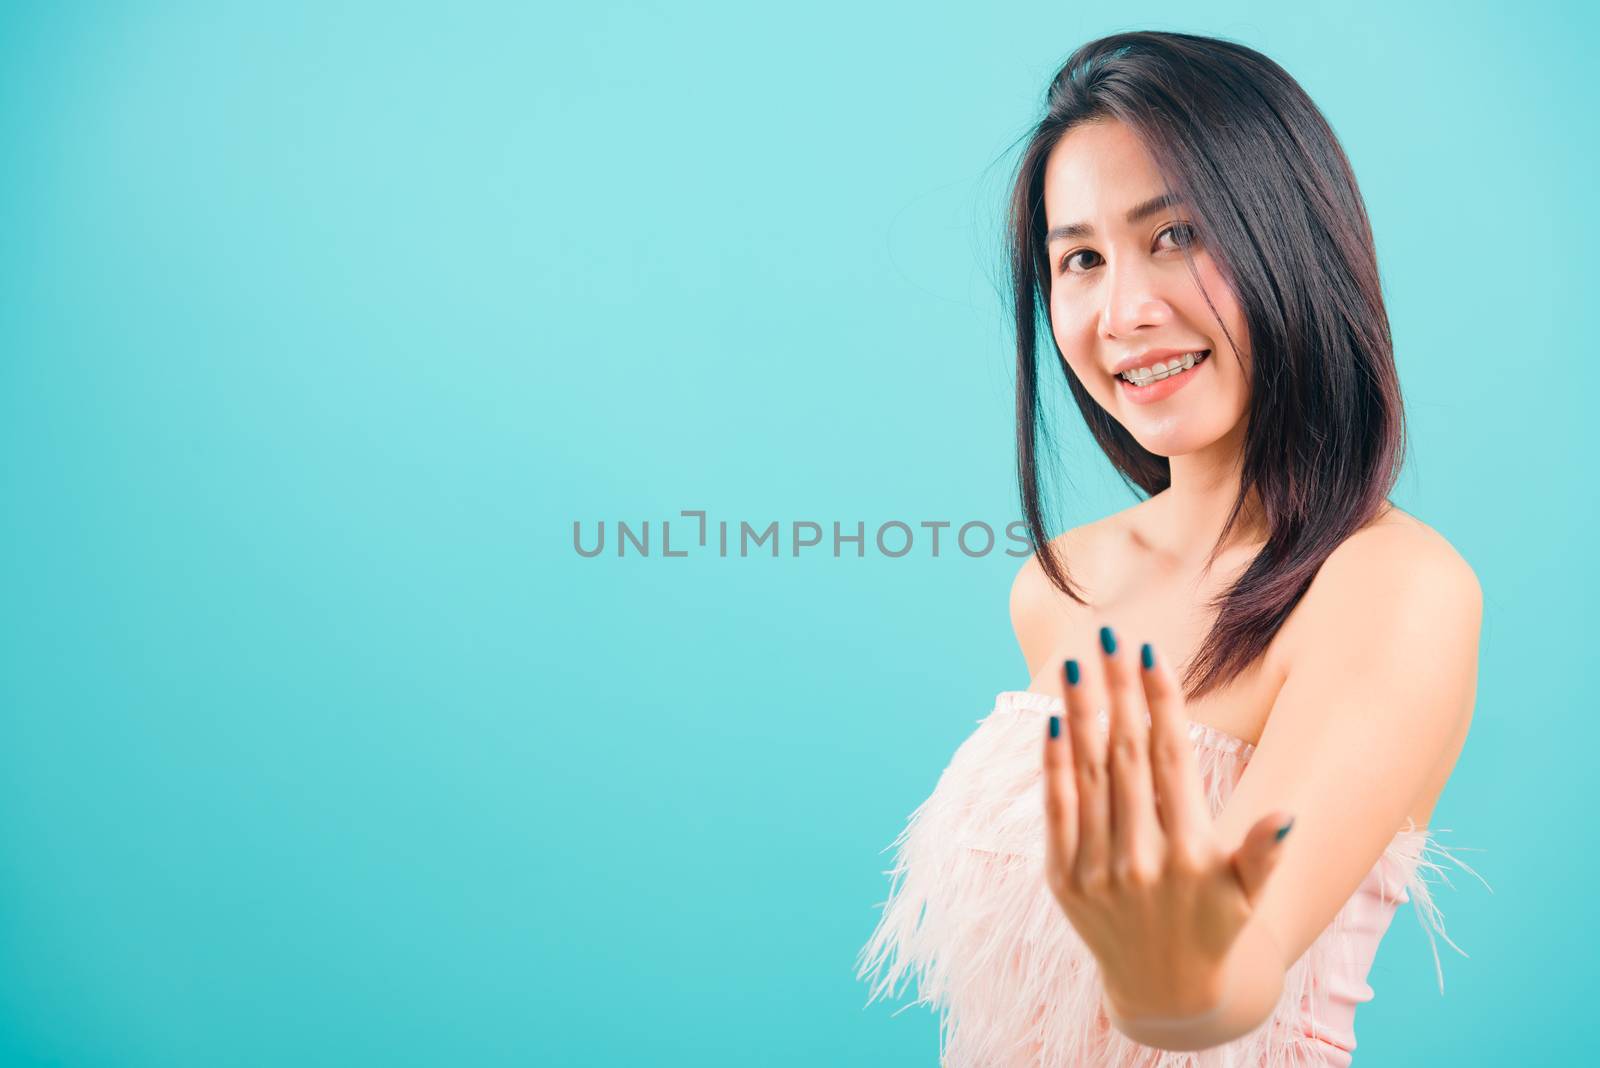 Smiling face Asian beautiful woman making gesture with hand inviting to come and her looking to camera on blue background, with copy space for text